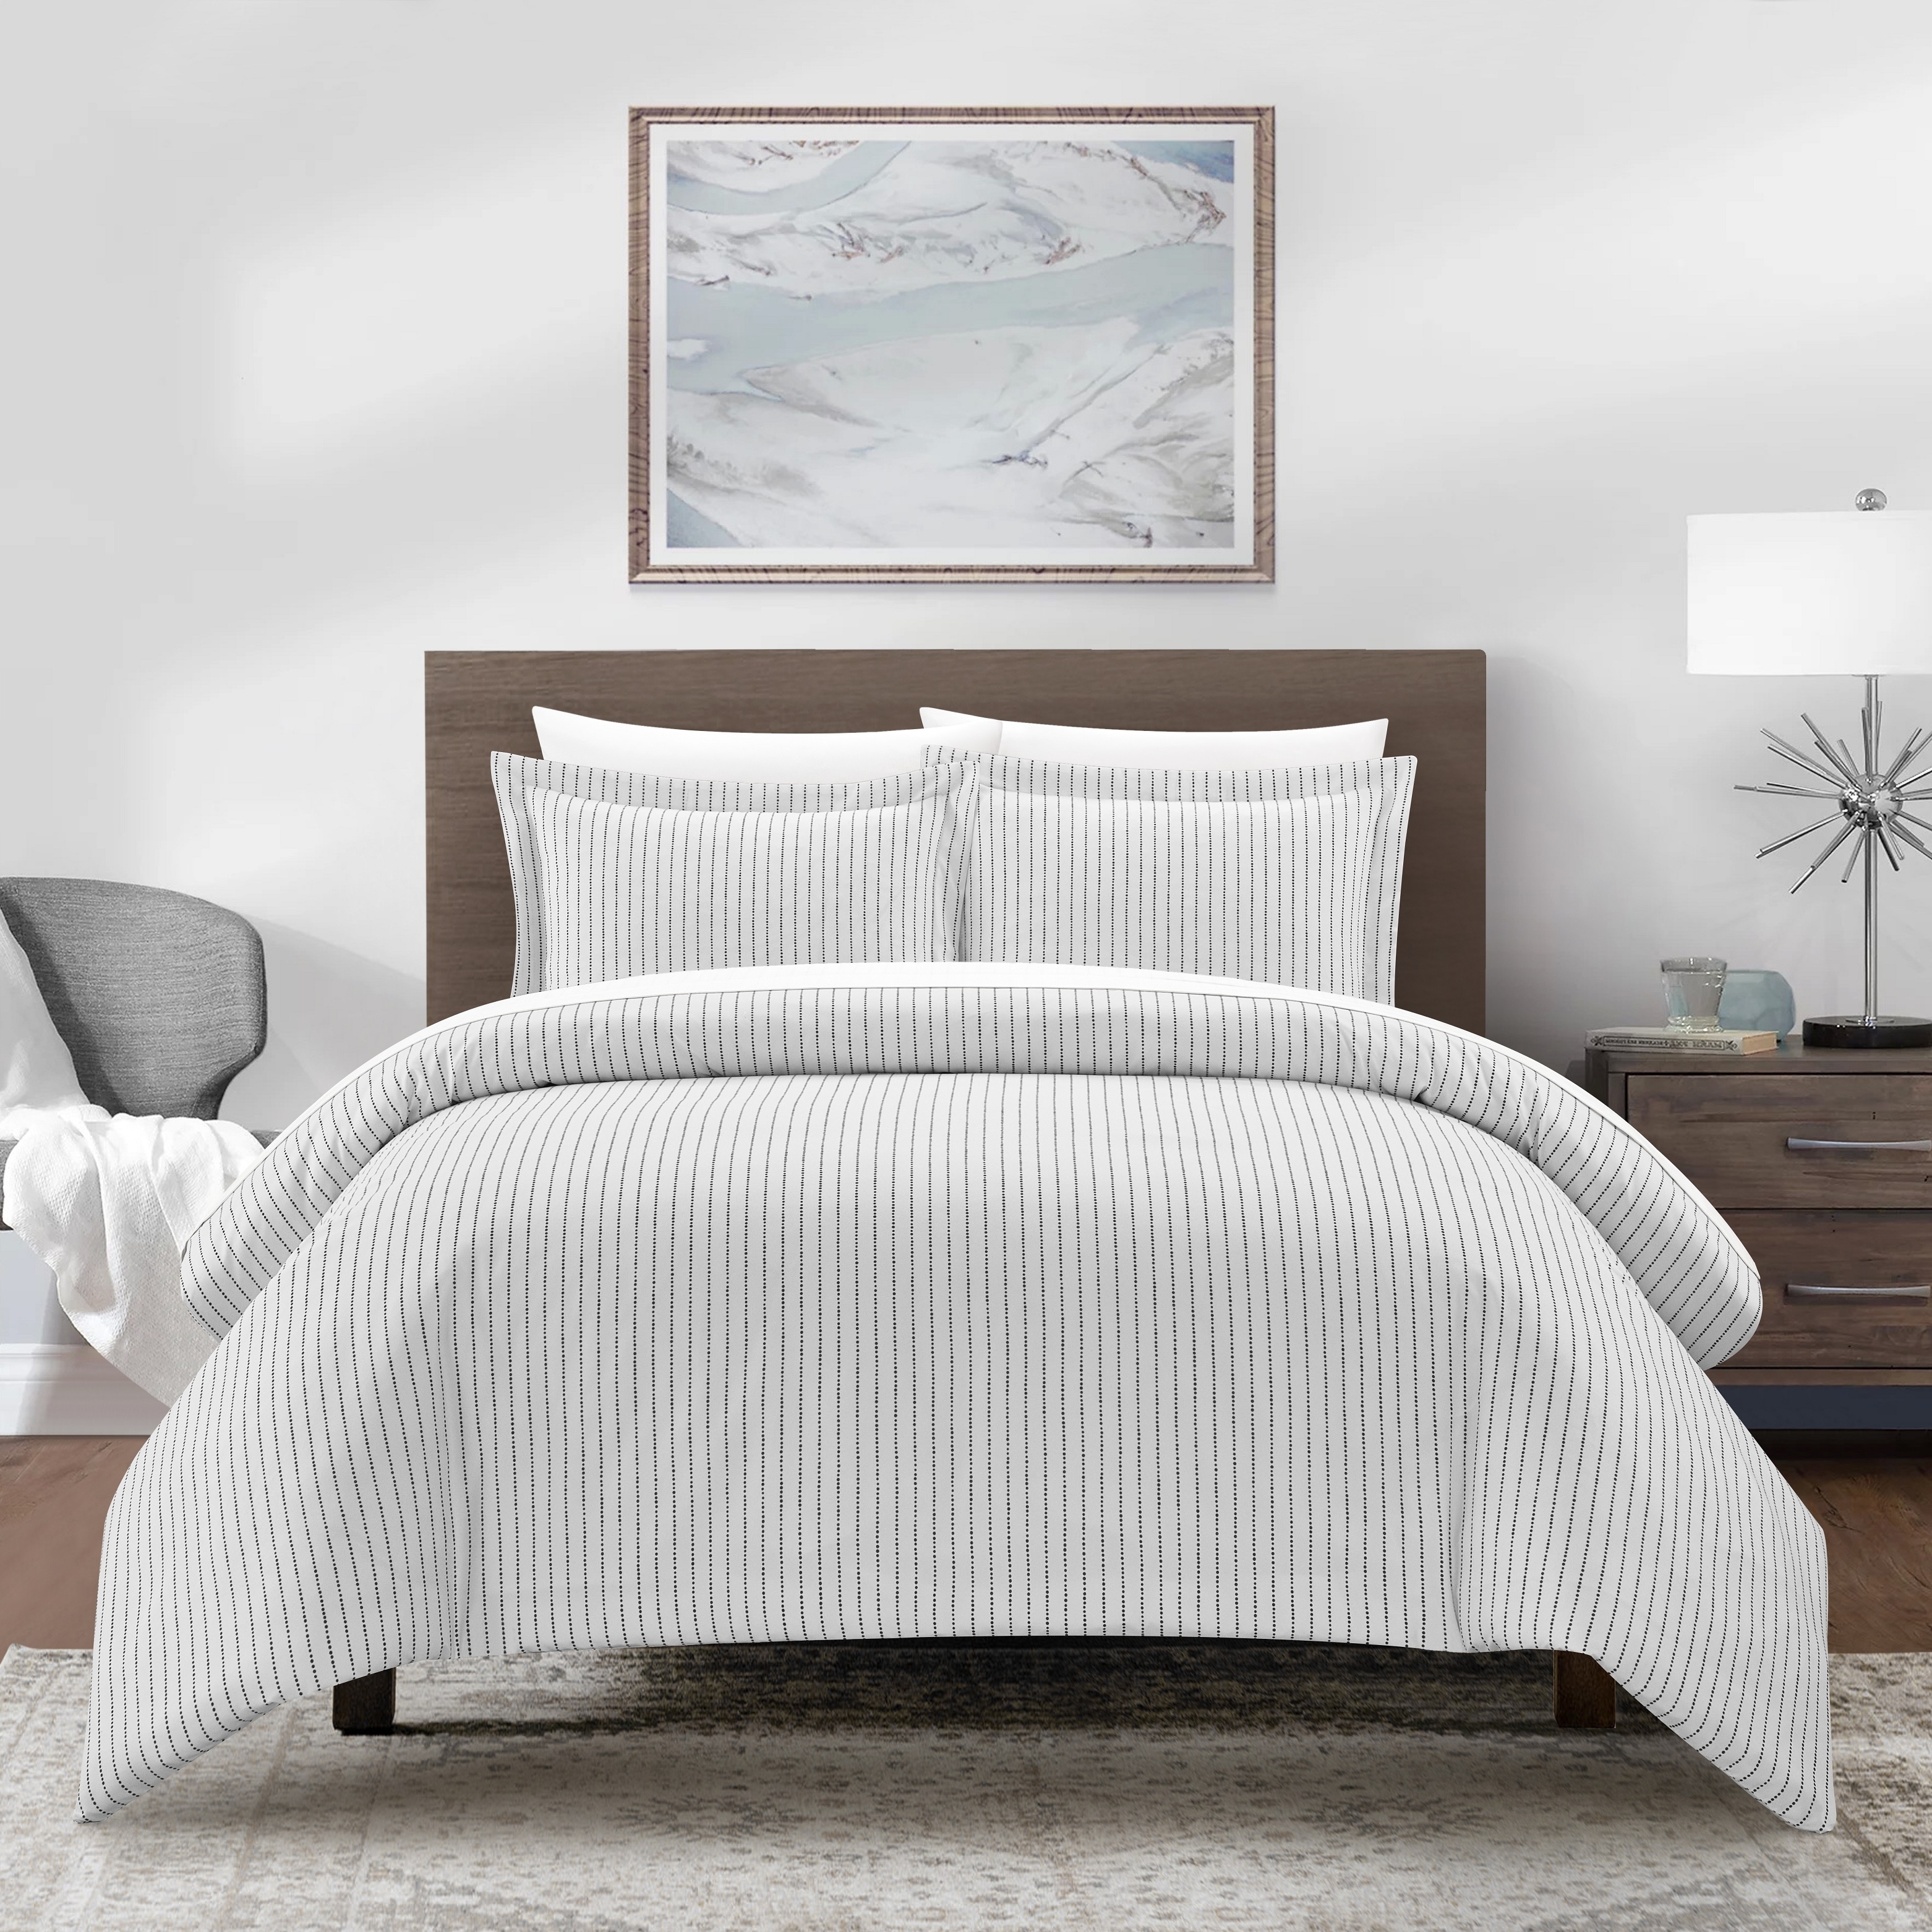 Vasey 2 Or 3 Piece Duvet Cover Set Contemporary Solid White With Dot Striped - Charcoal, Twin